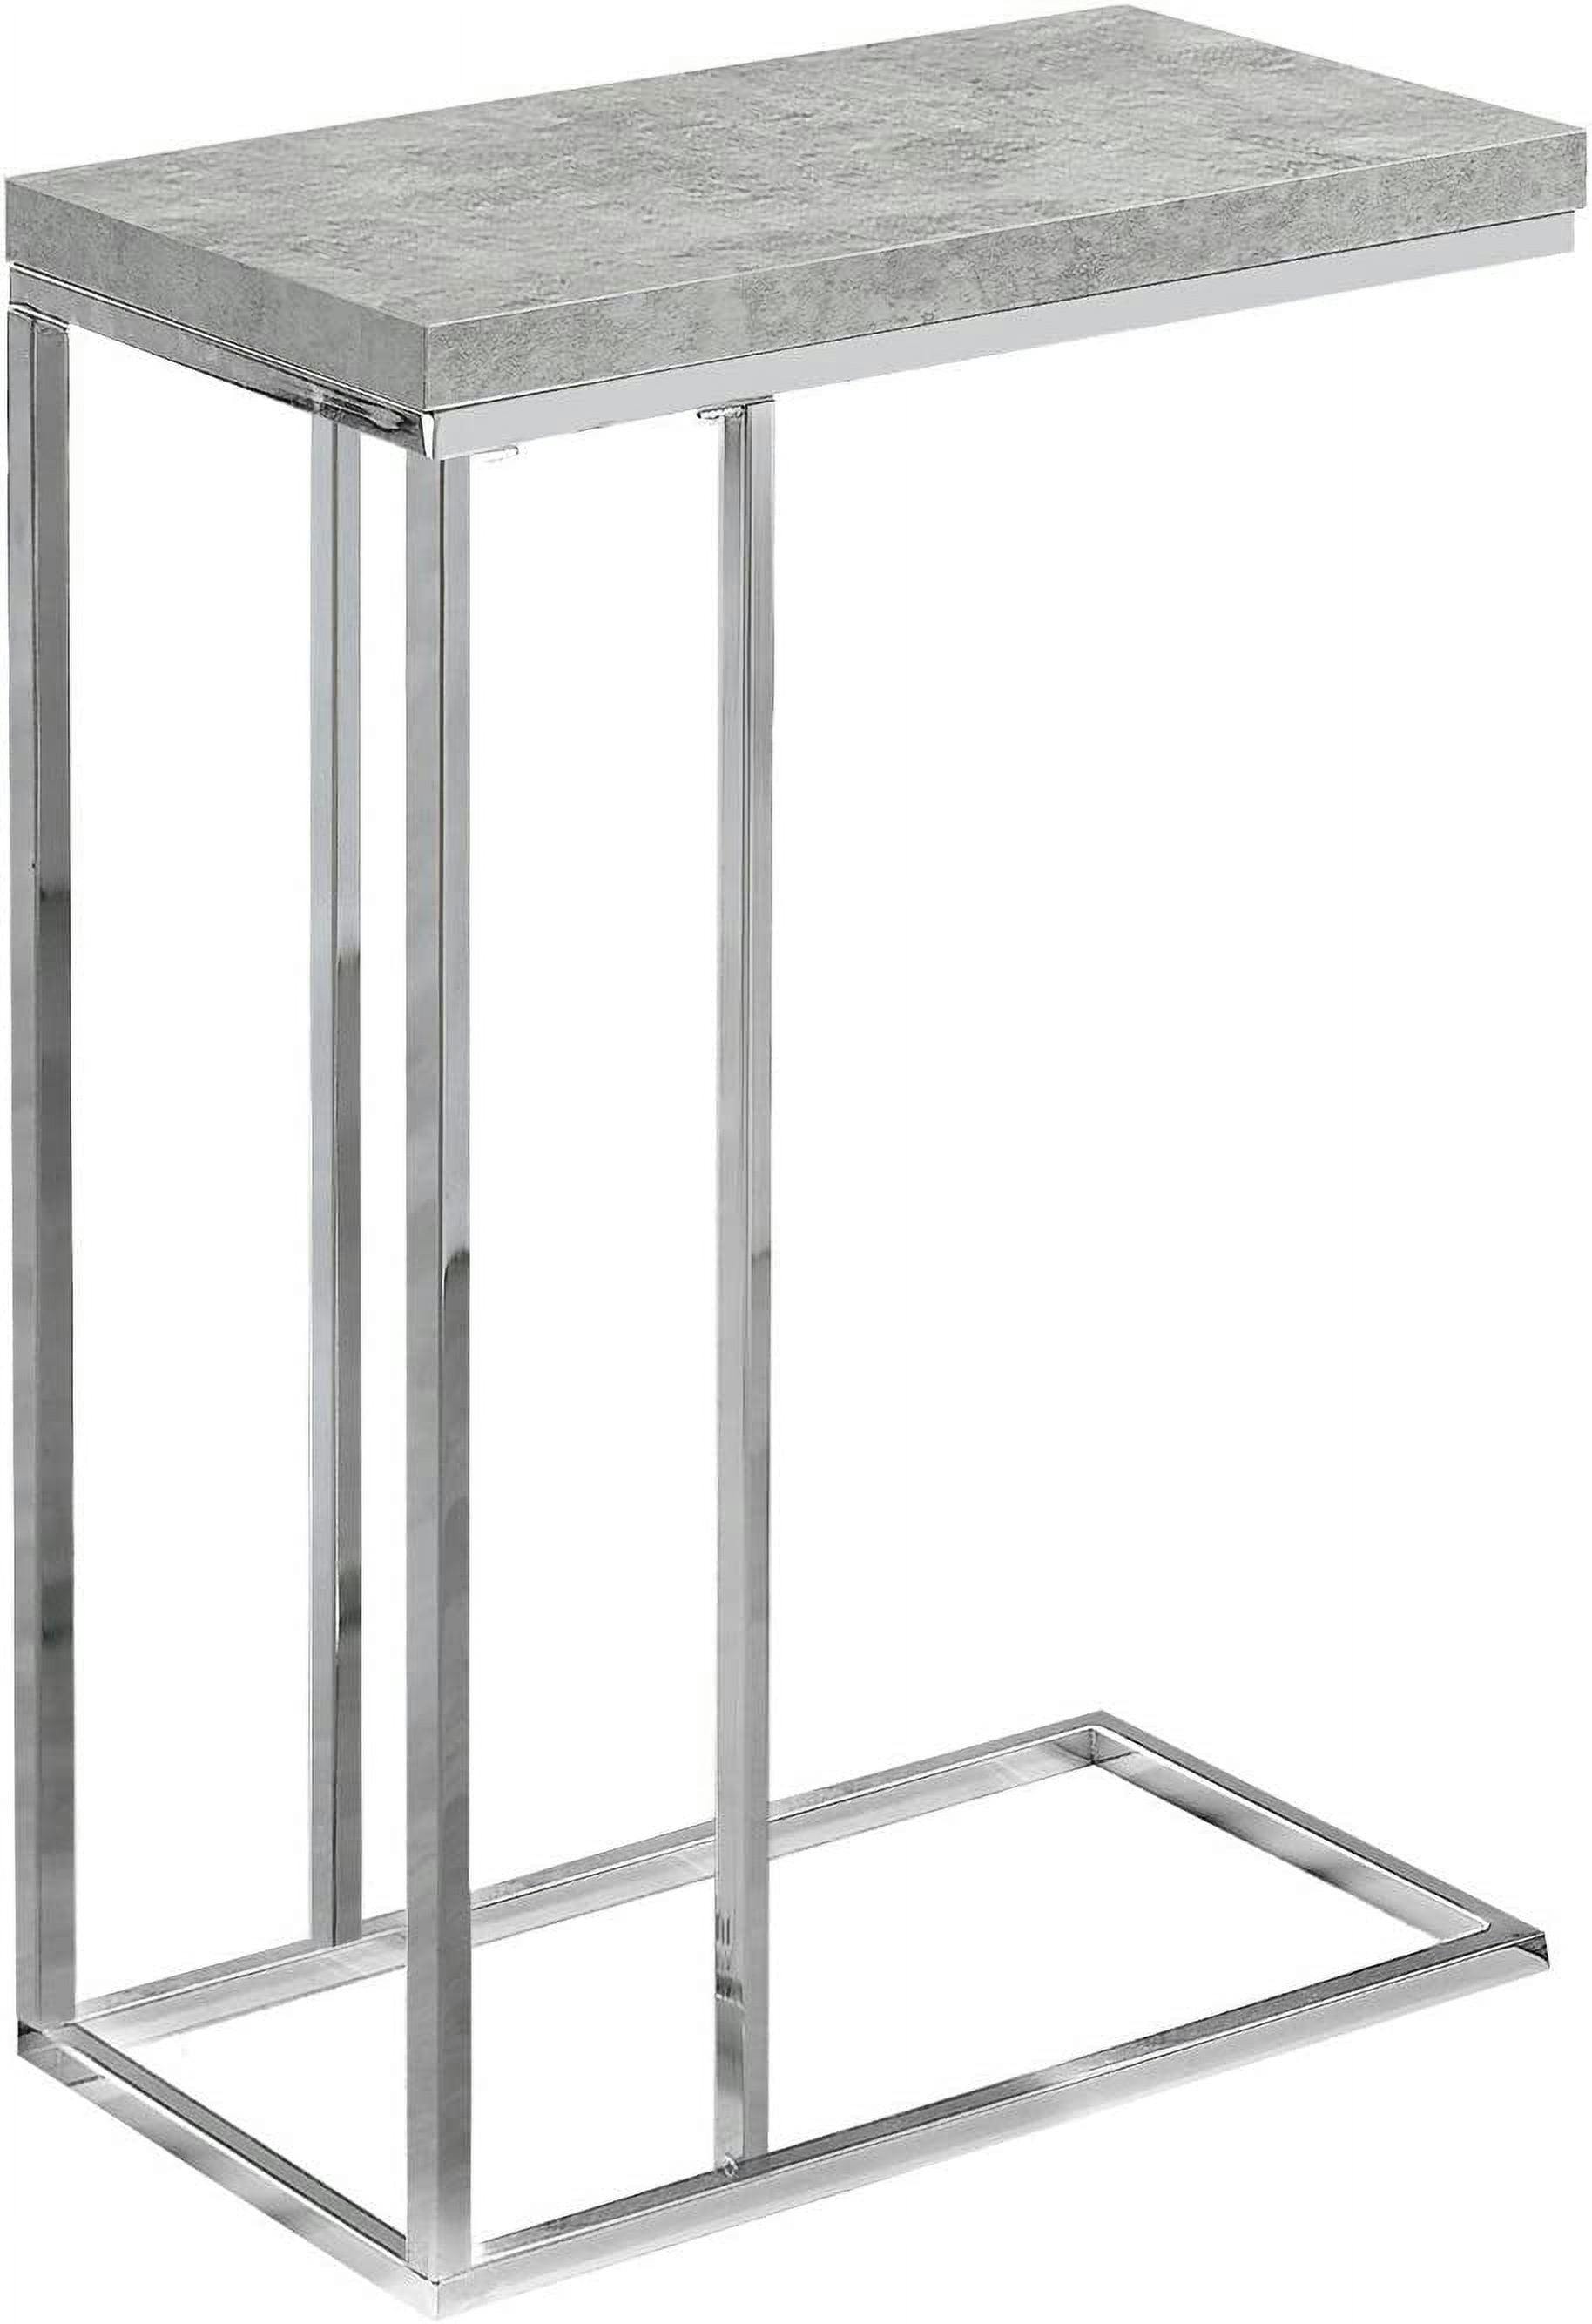 Contemporary Chrome Metal Accent Table with Grey Cement Finish